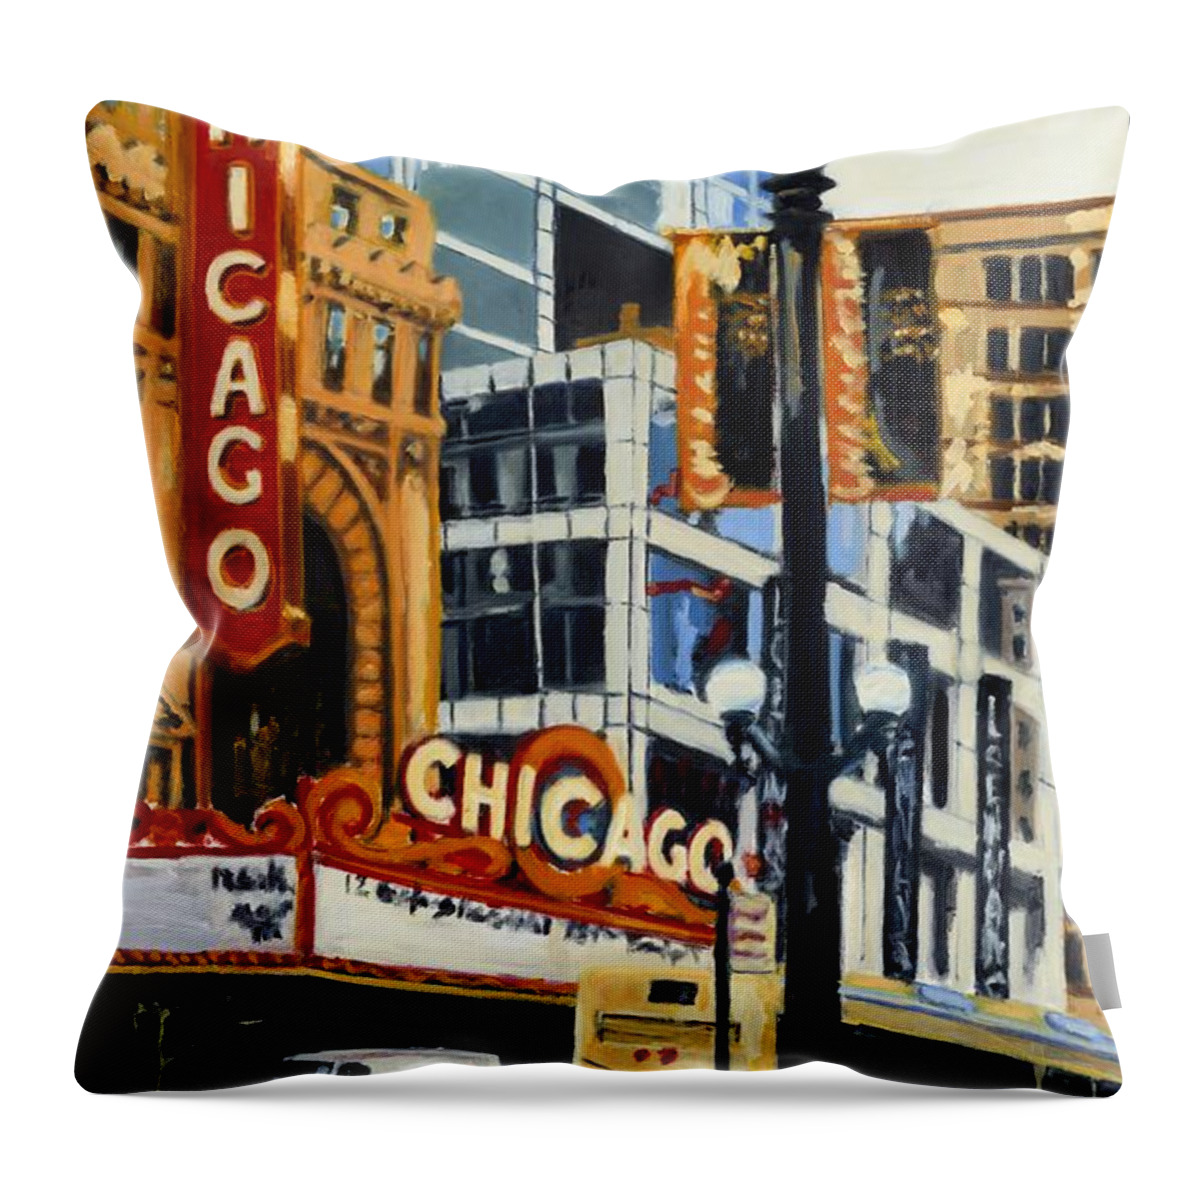 Chicago Throw Pillow featuring the painting Chicago - The Chicago Theater by Robert Reeves